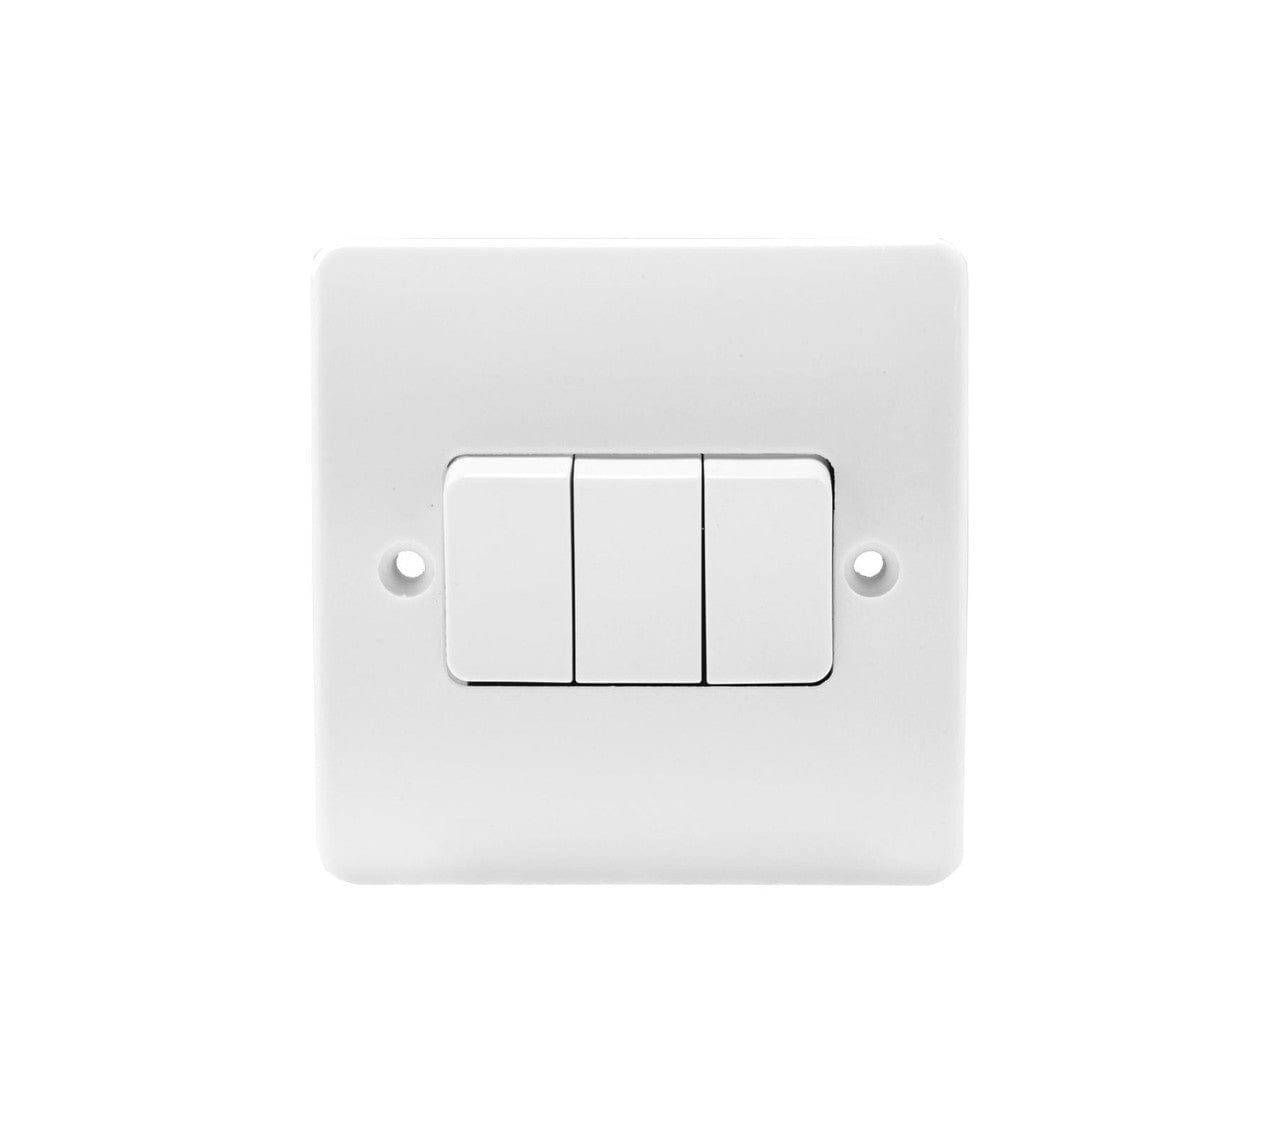 MK Electric 10A 3-Gang 2-Way Light Switch | Supply Master | Accra, Ghana Switches & Sockets Buy Tools hardware Building materials